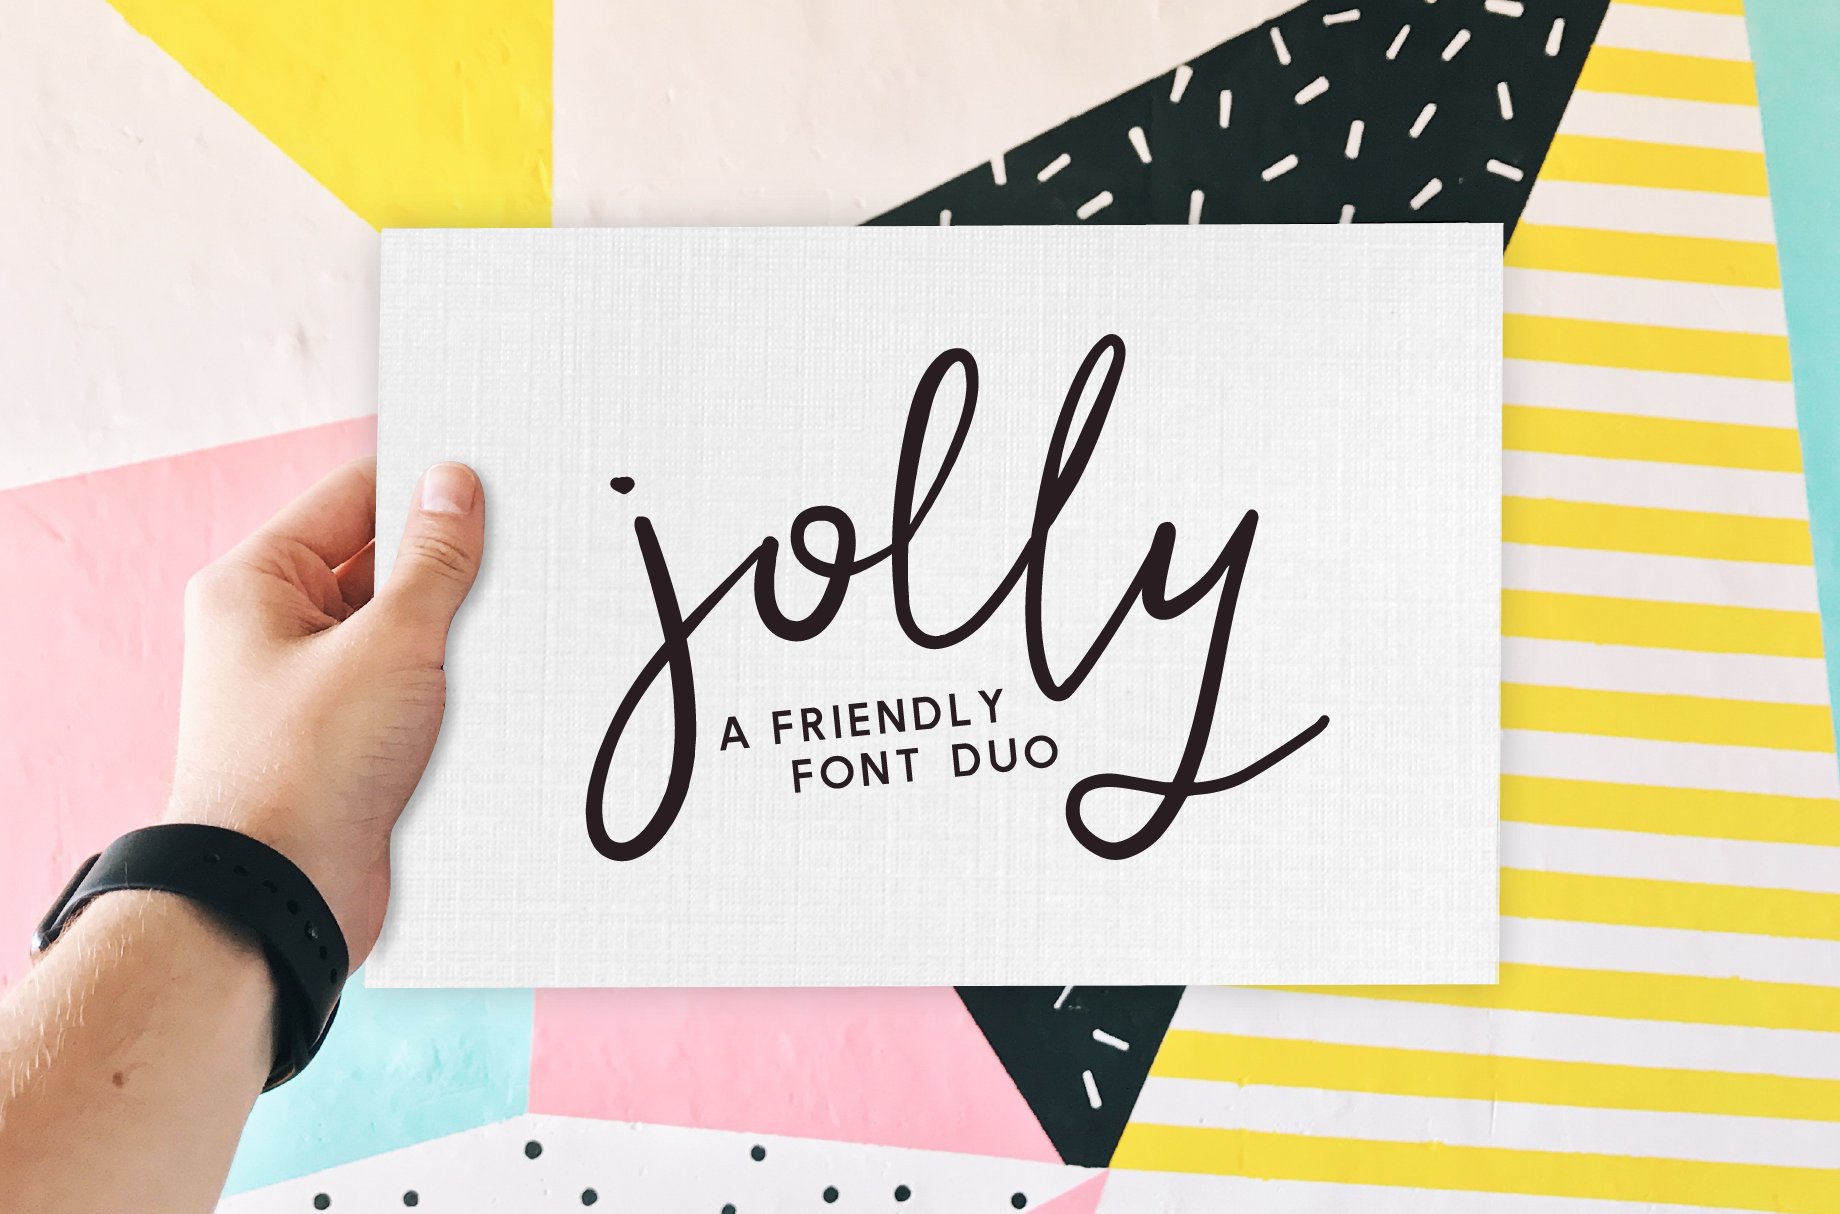 Jolly | A Friendly Font Duo cover image.